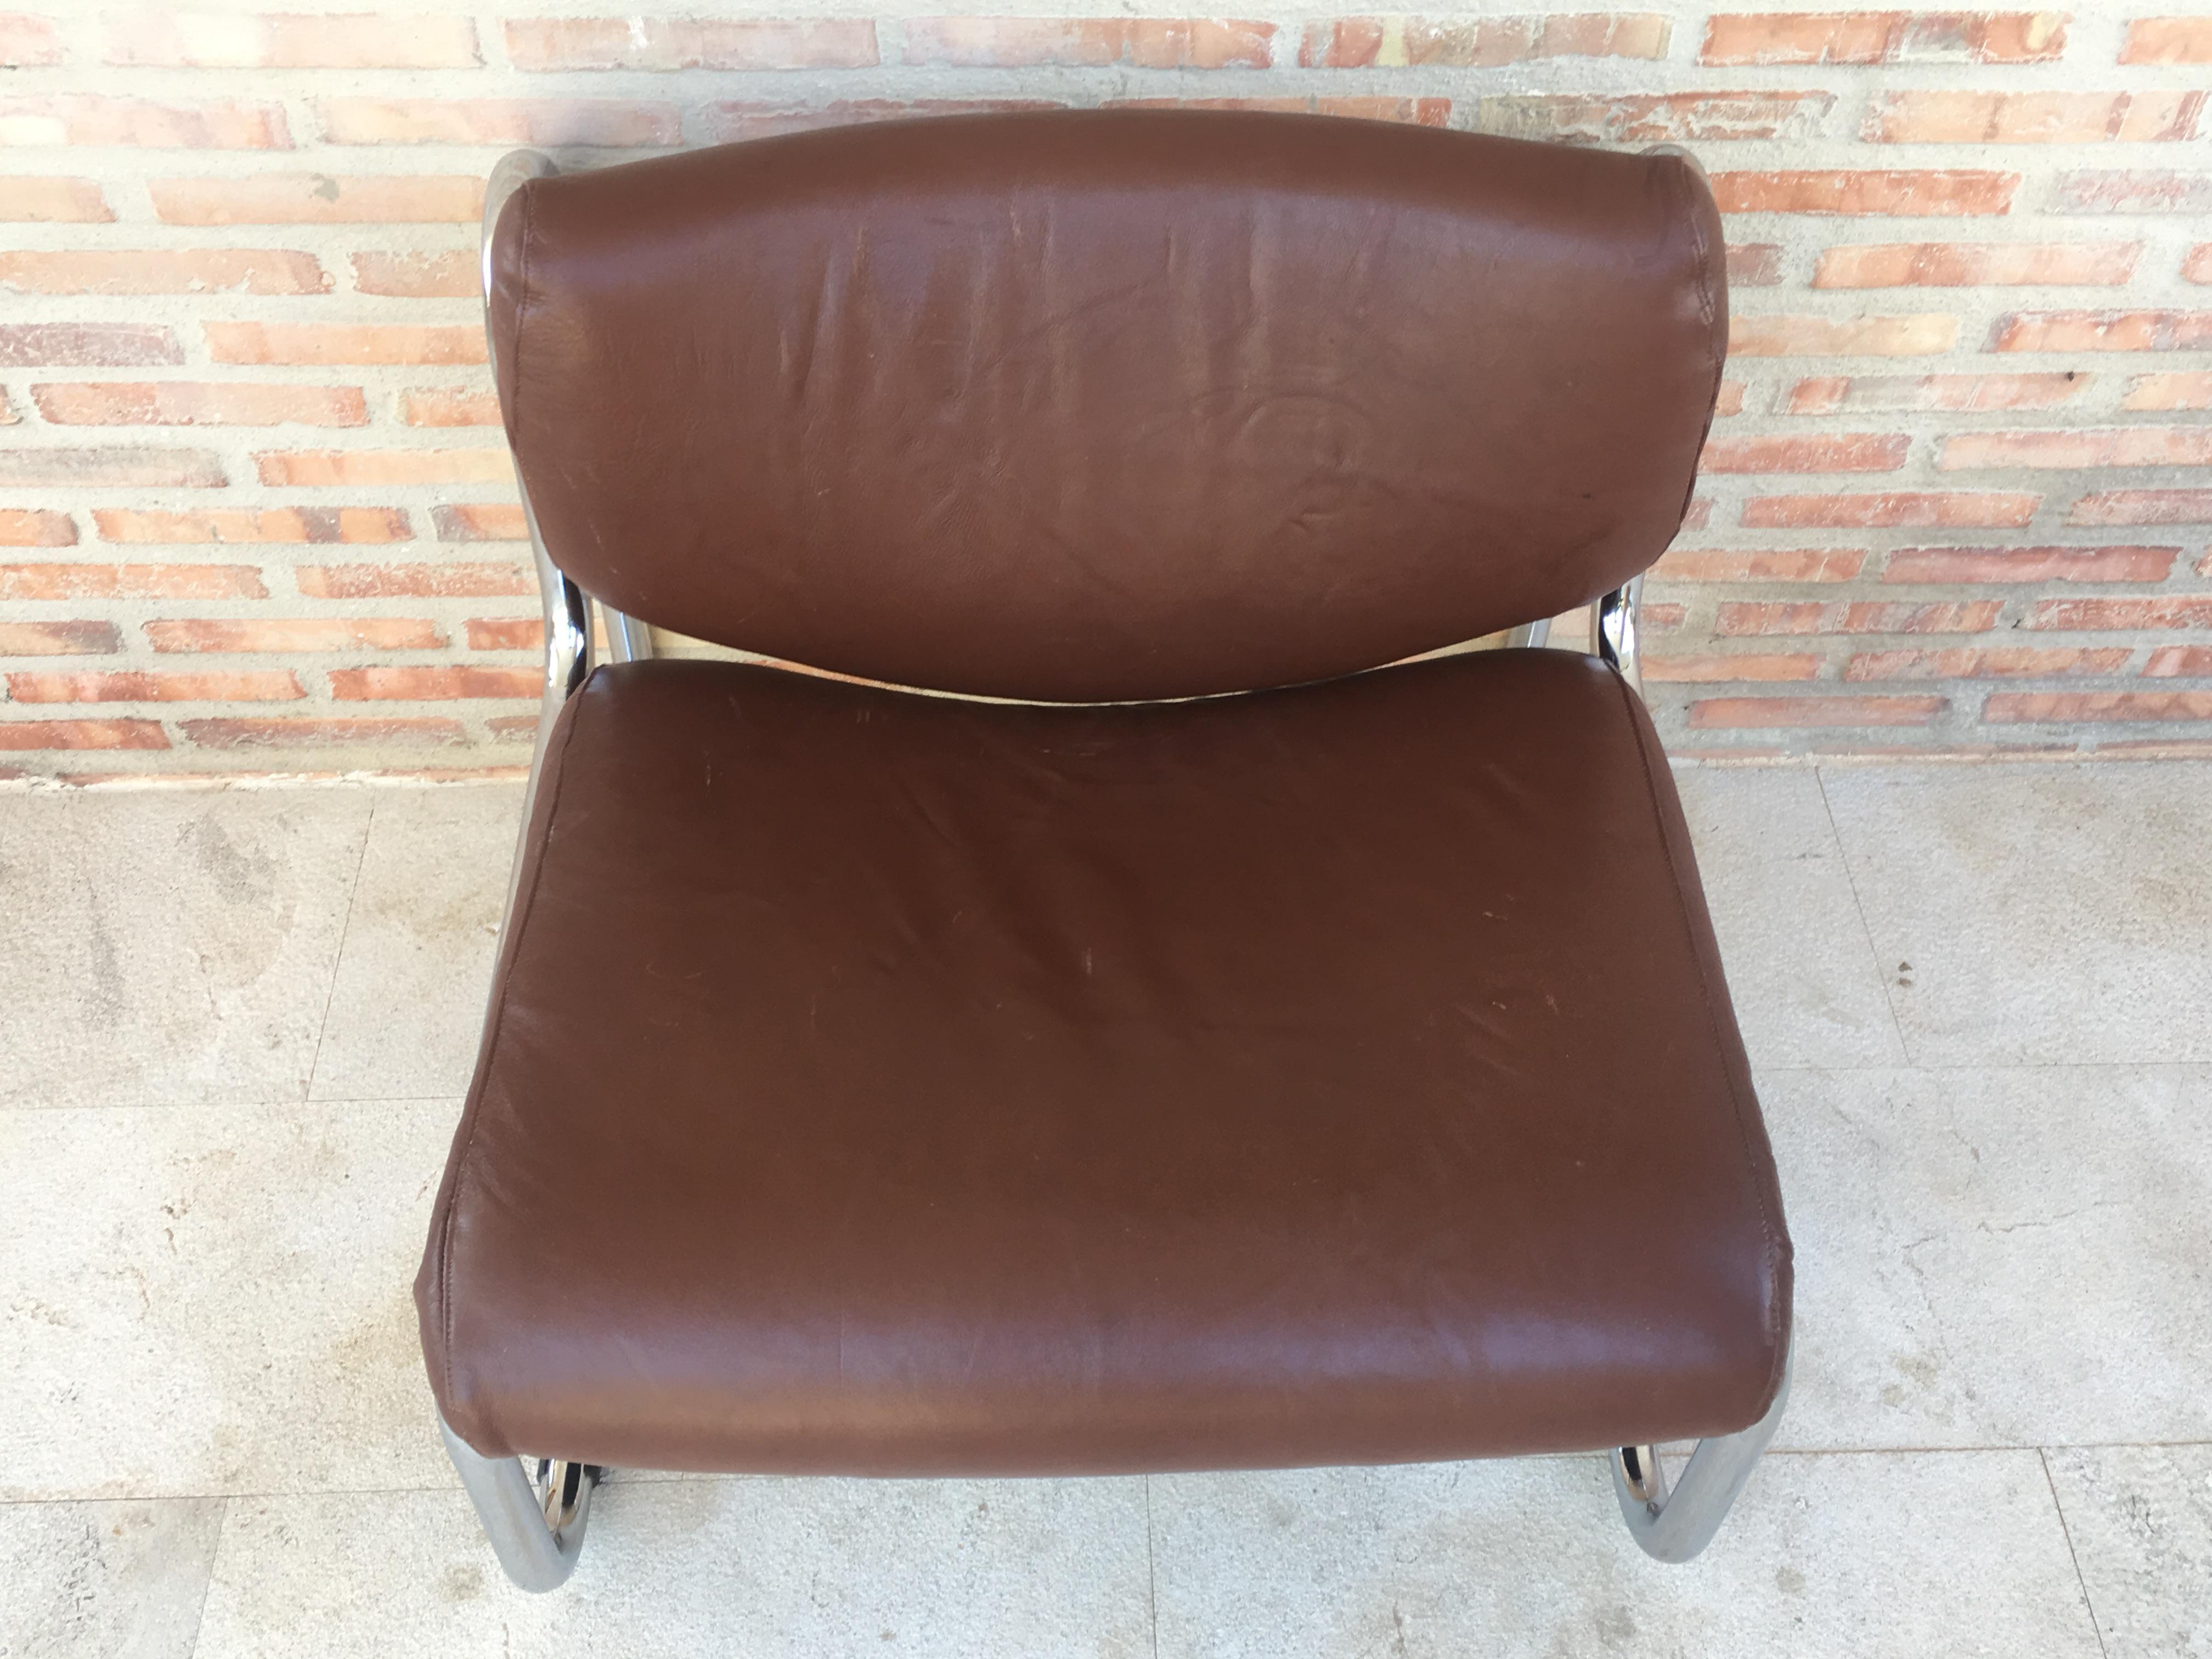 Midcentury Sculptural Chrome and Leather Italian Lounge Chair 1